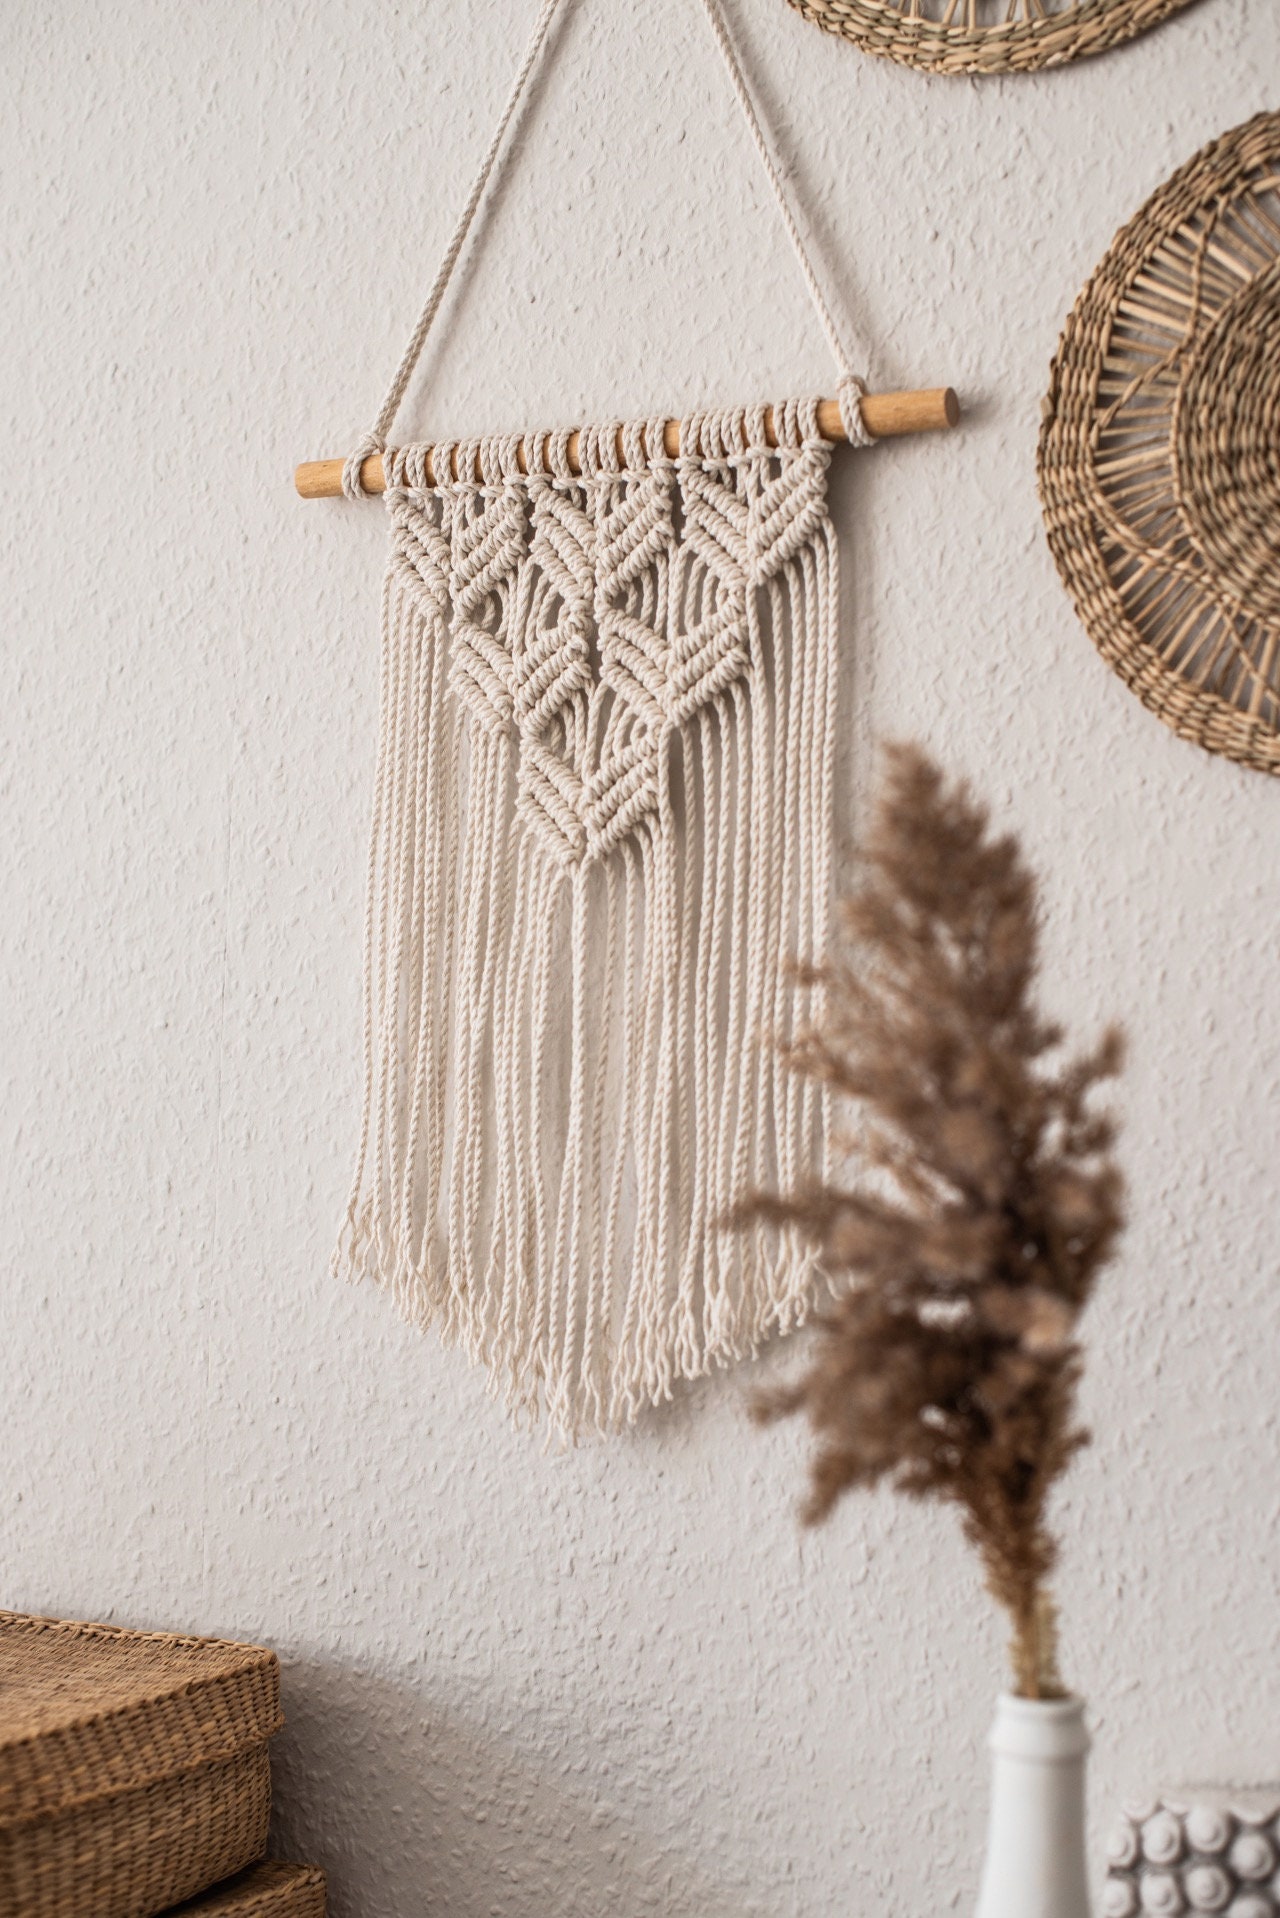 DIY Mini Macrame Wall Hanging with Selenite Kit for Beginners – Max and Herb